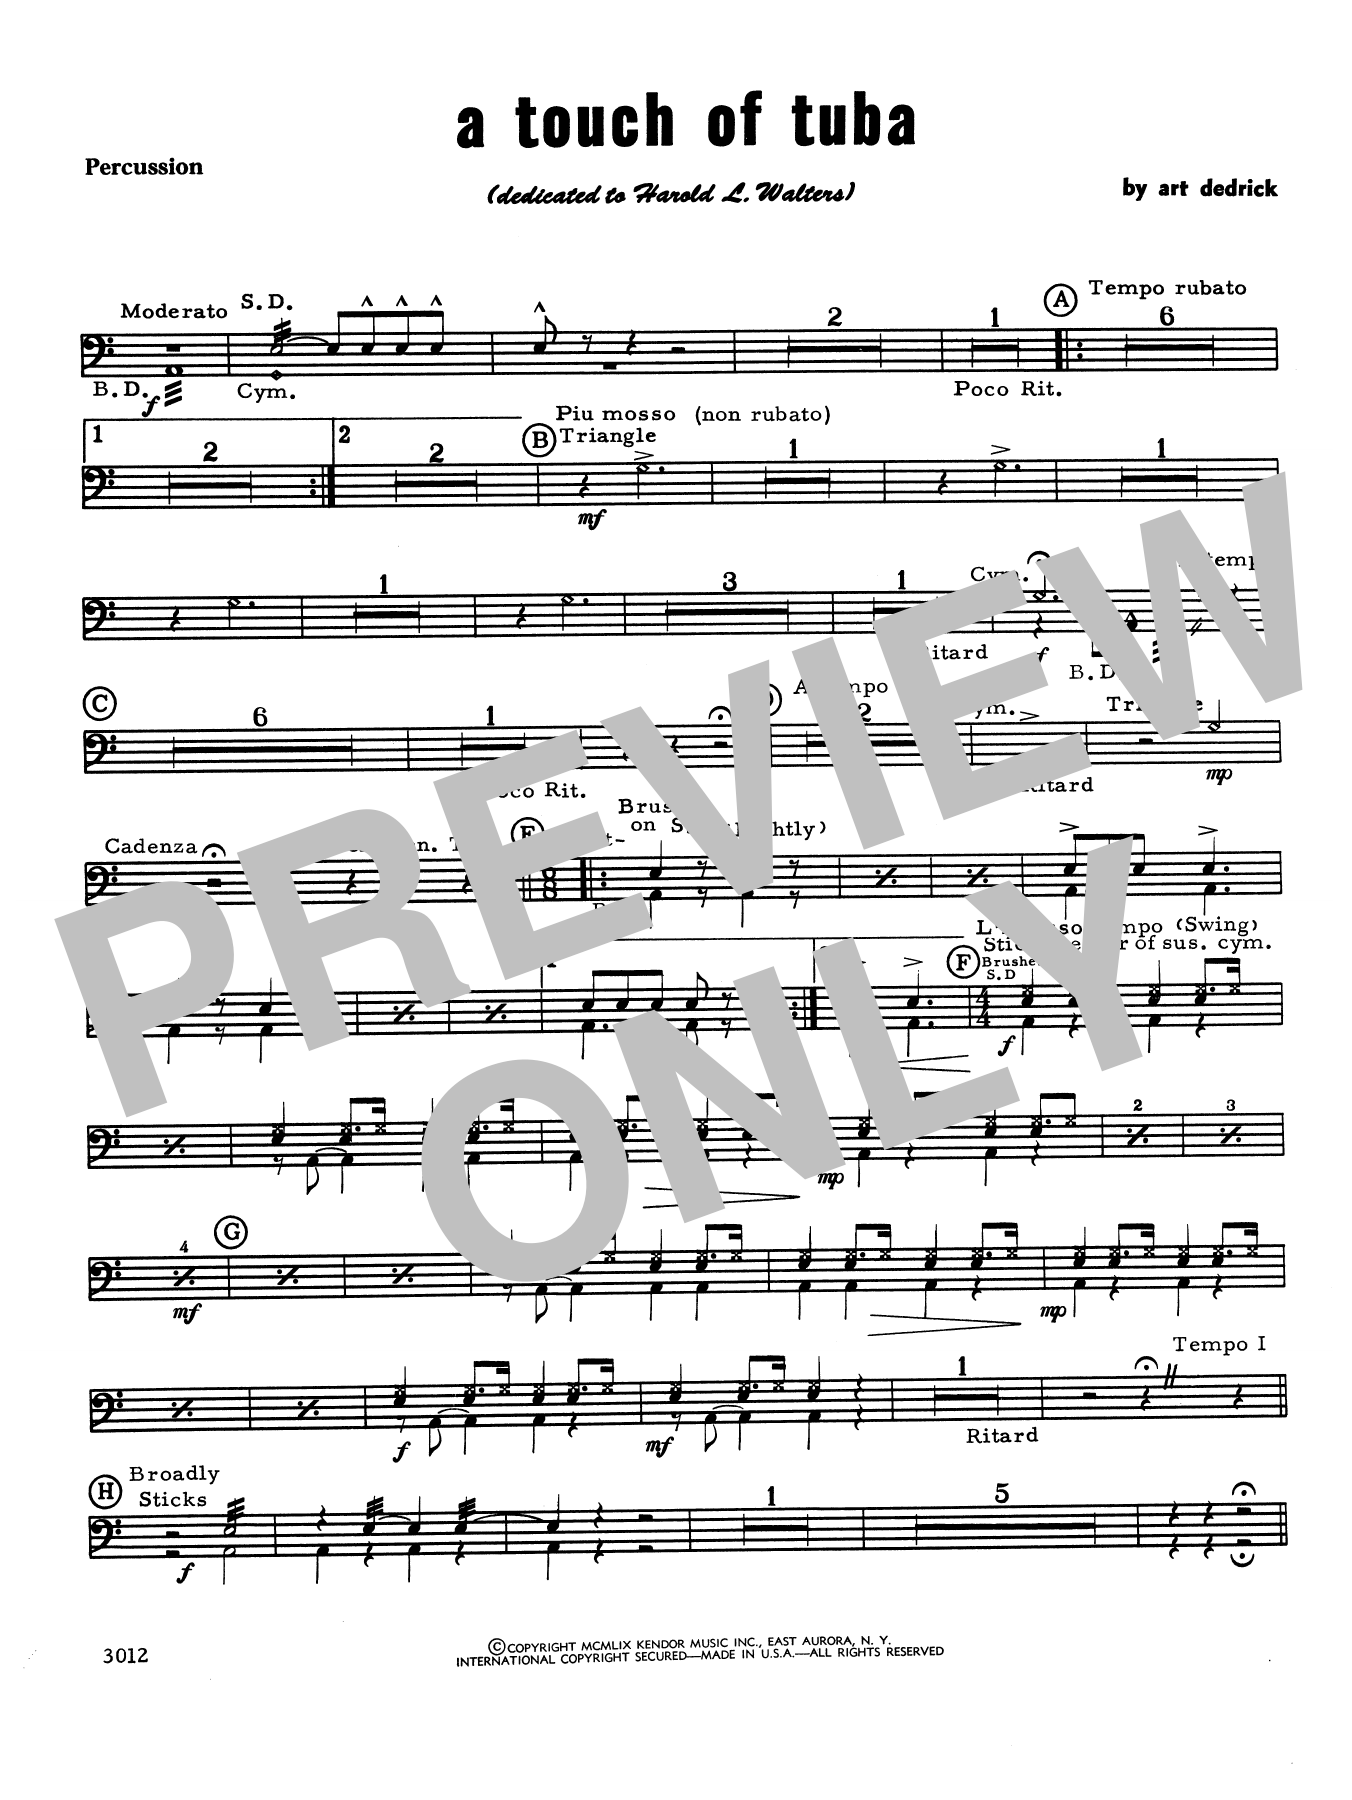 Download Art Dedrick A Touch Of Tuba - Percussion Sheet Music